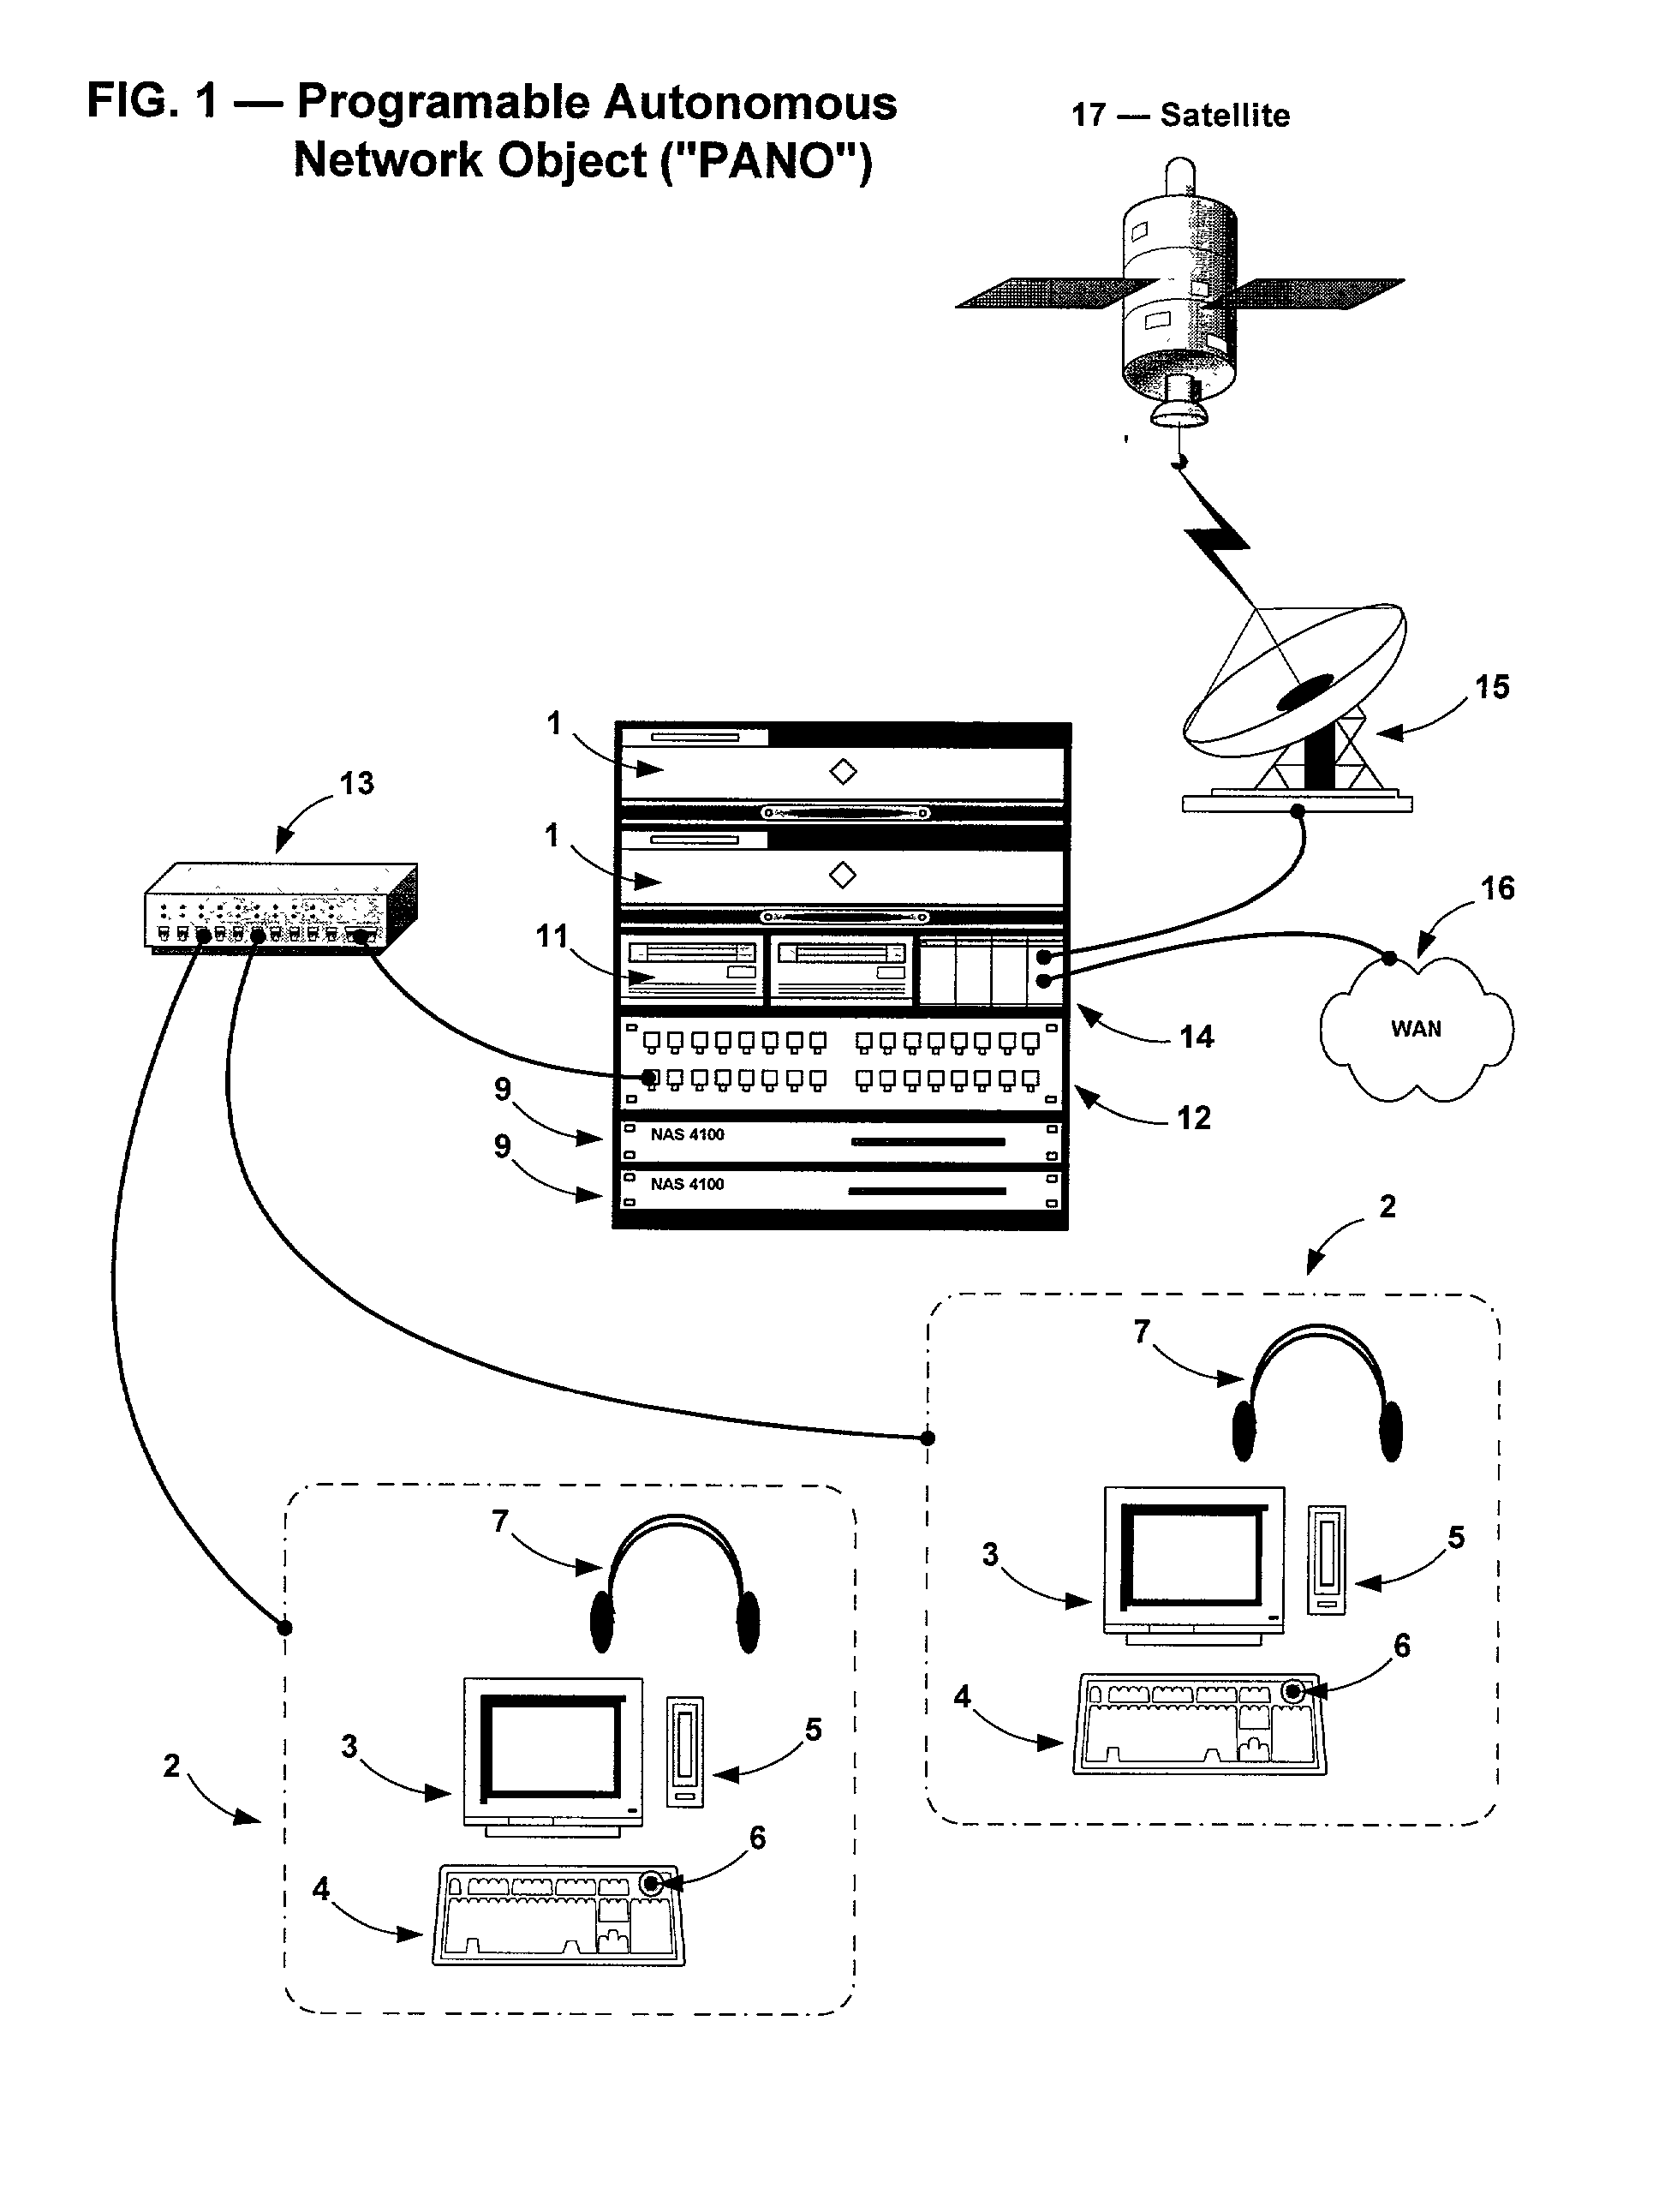 System and method for using programable autonomous network objects to store and deliver content to globally distributed groups of transient users